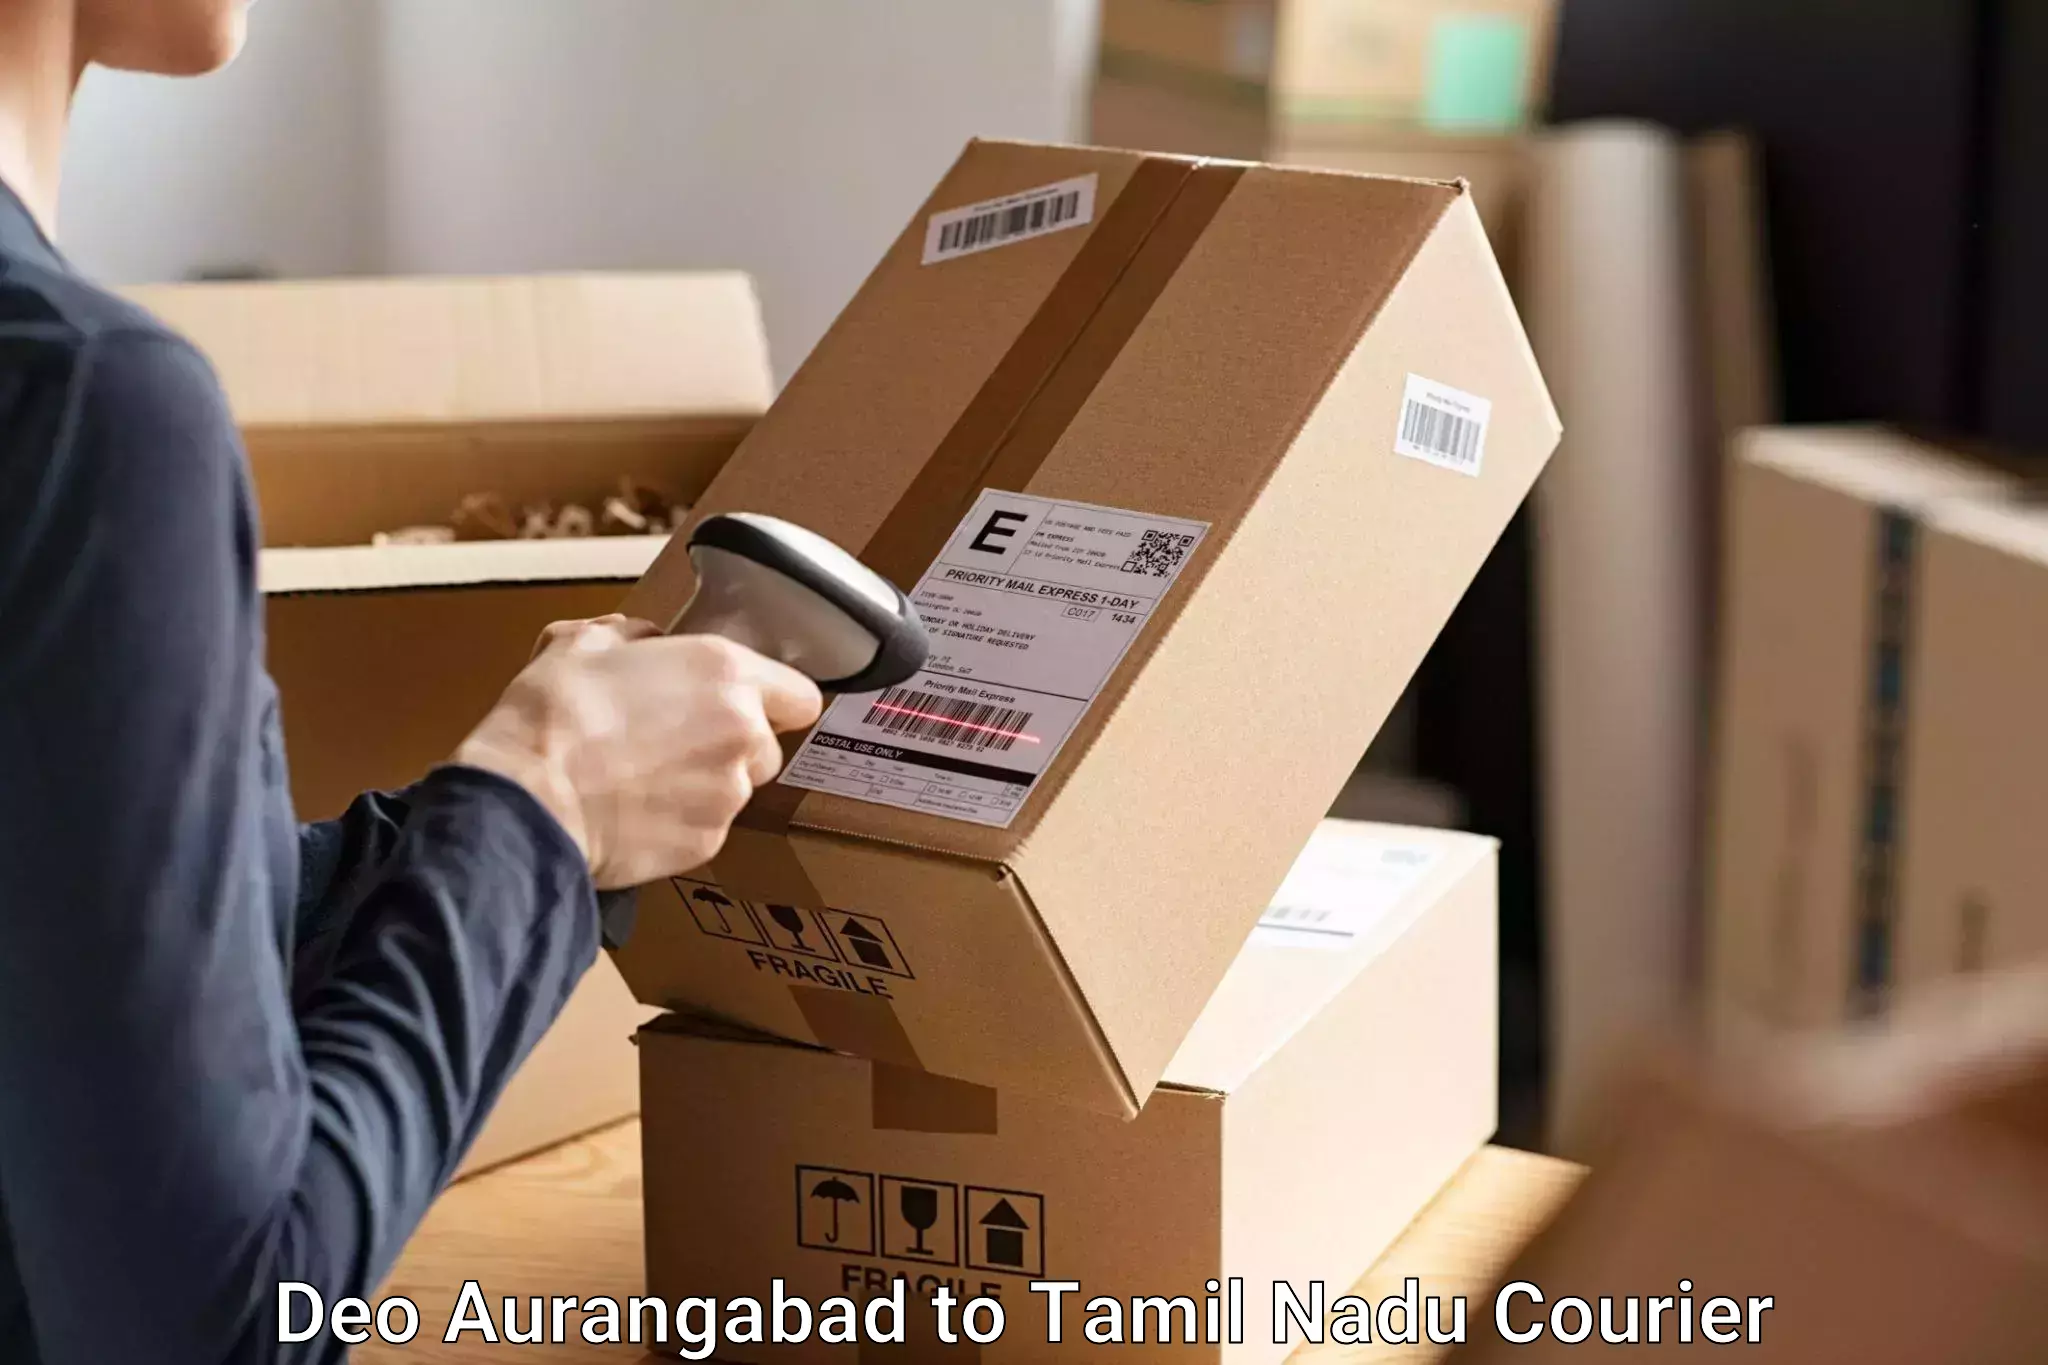 Baggage relocation service Deo Aurangabad to Chengam